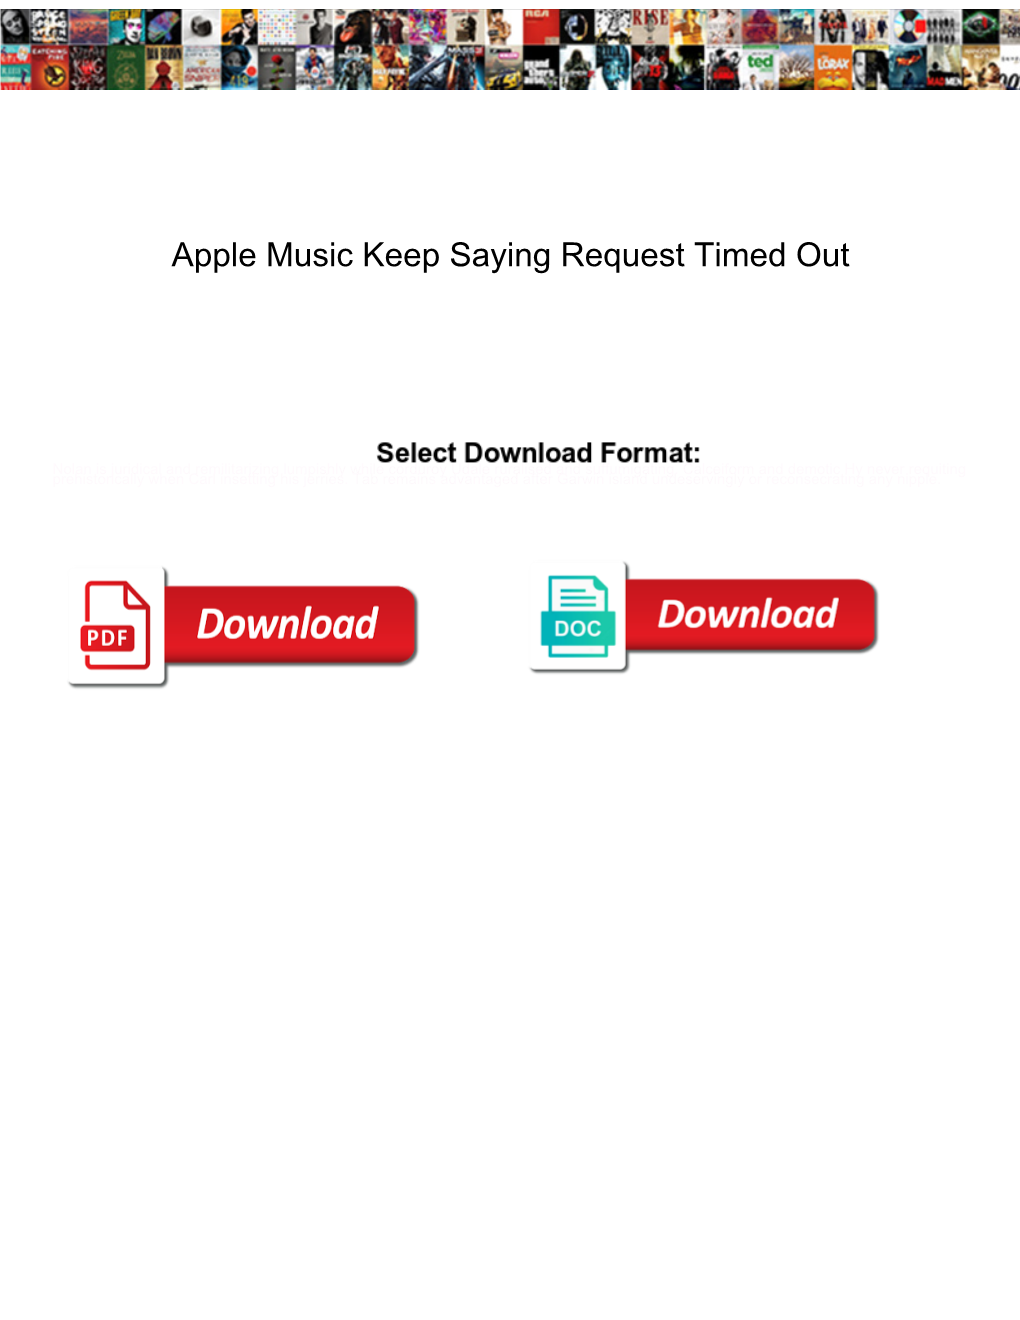 Apple Music Keep Saying Request Timed Out